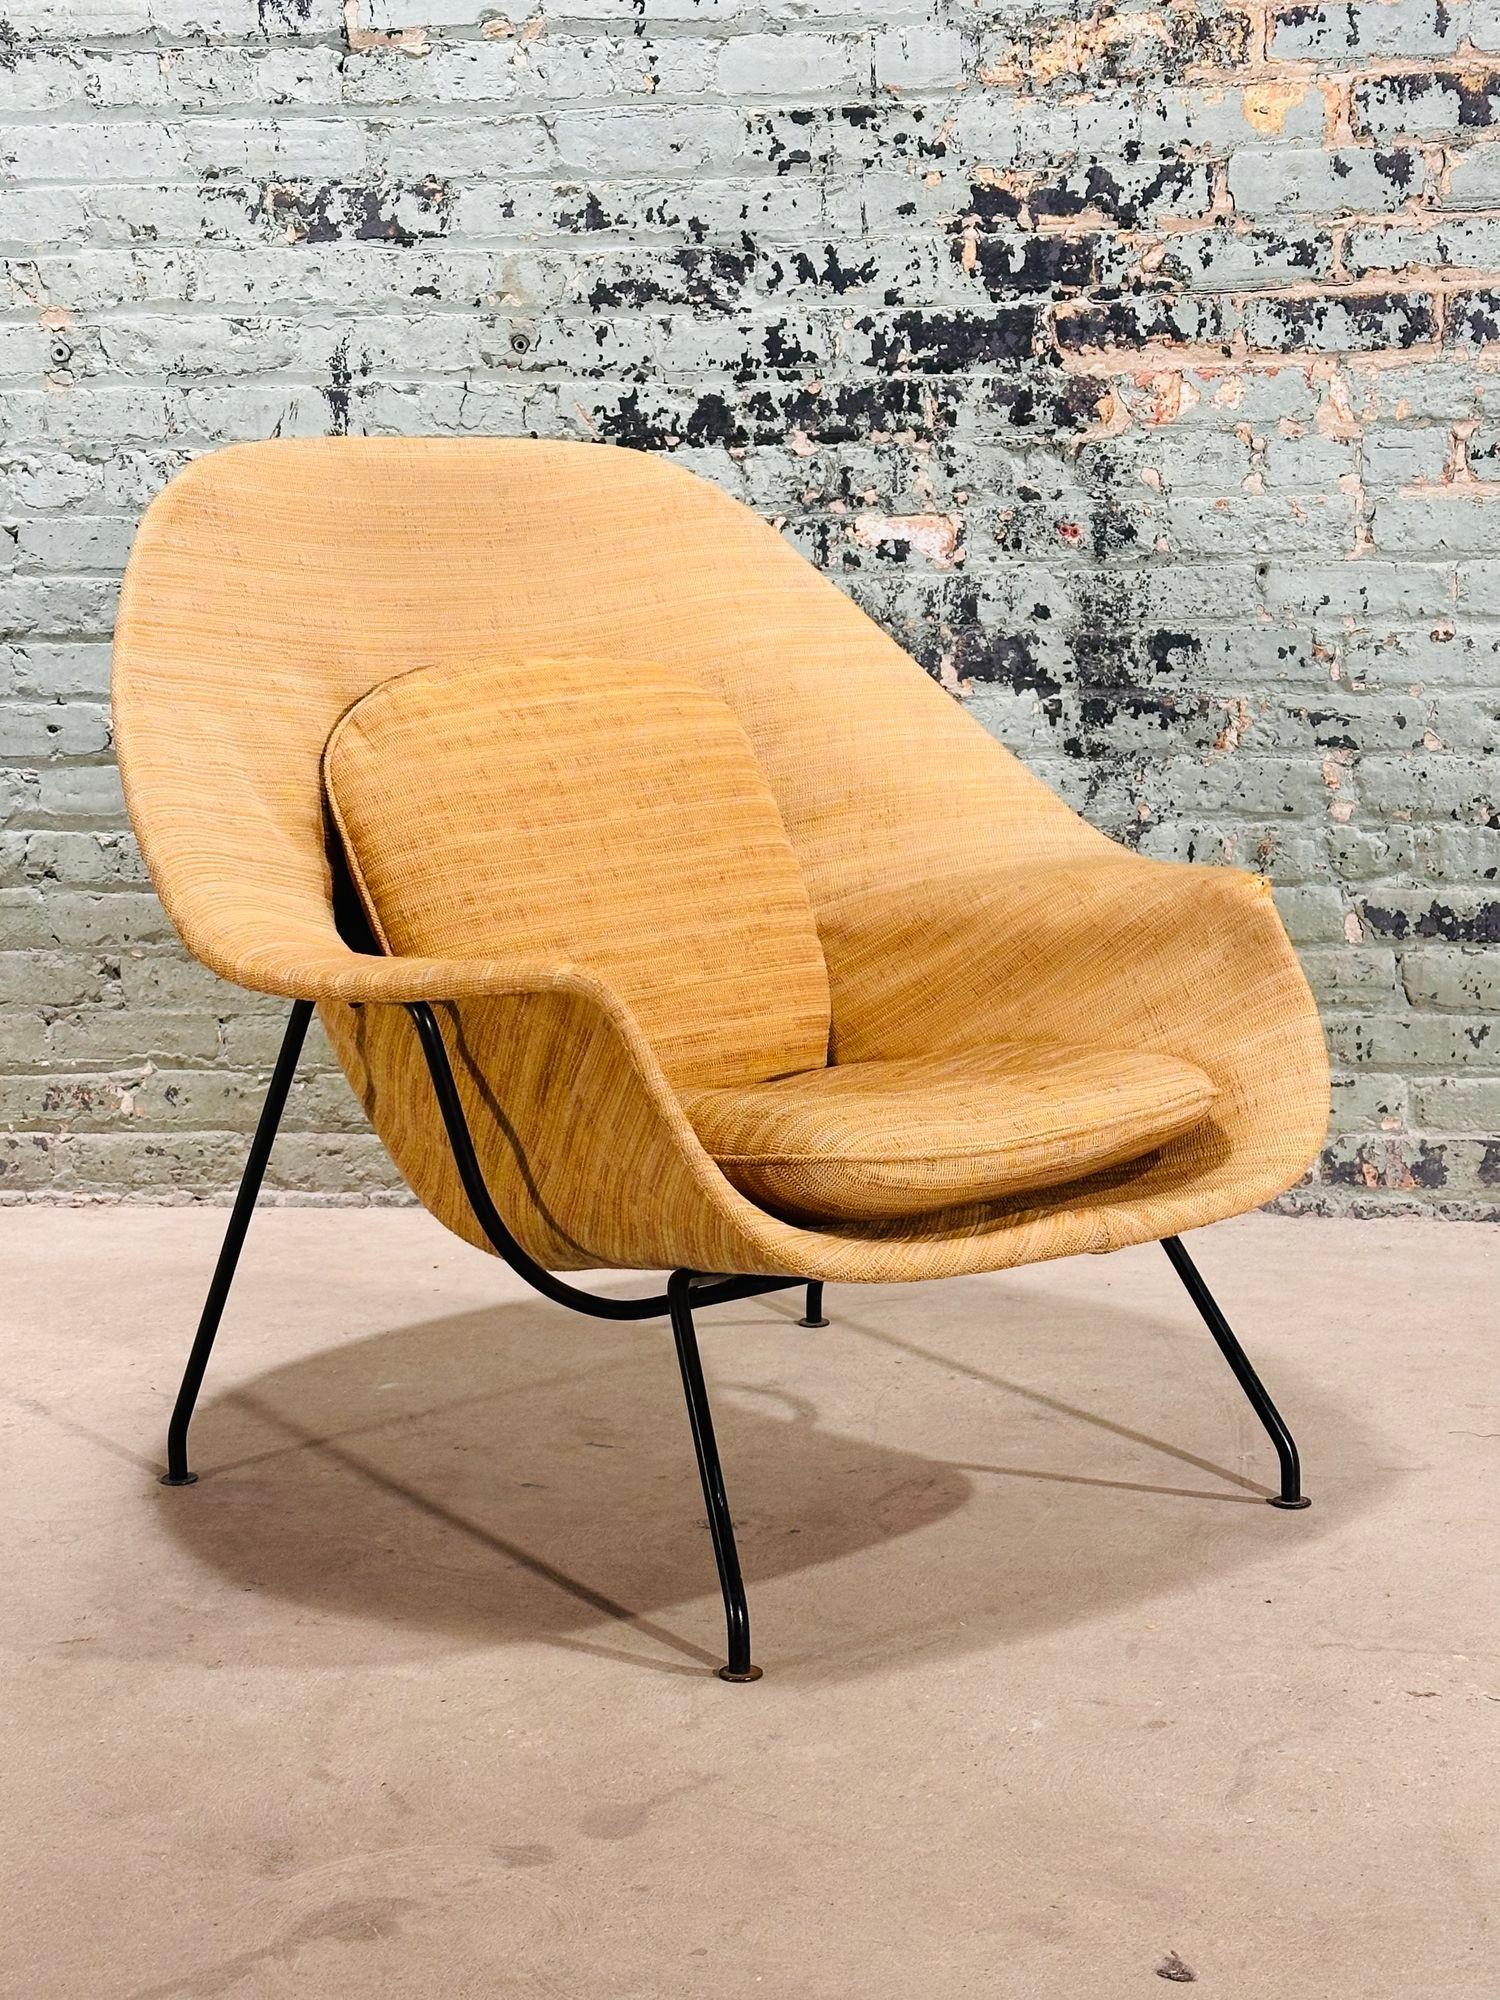 Early Eero Saarinen for Knoll Womb Chair, 1950. Upholstery is all original. We have in house upholstery if interested for an additional charge. You can send COM or we can send fabric swatches to you.
Chair measures 38.5